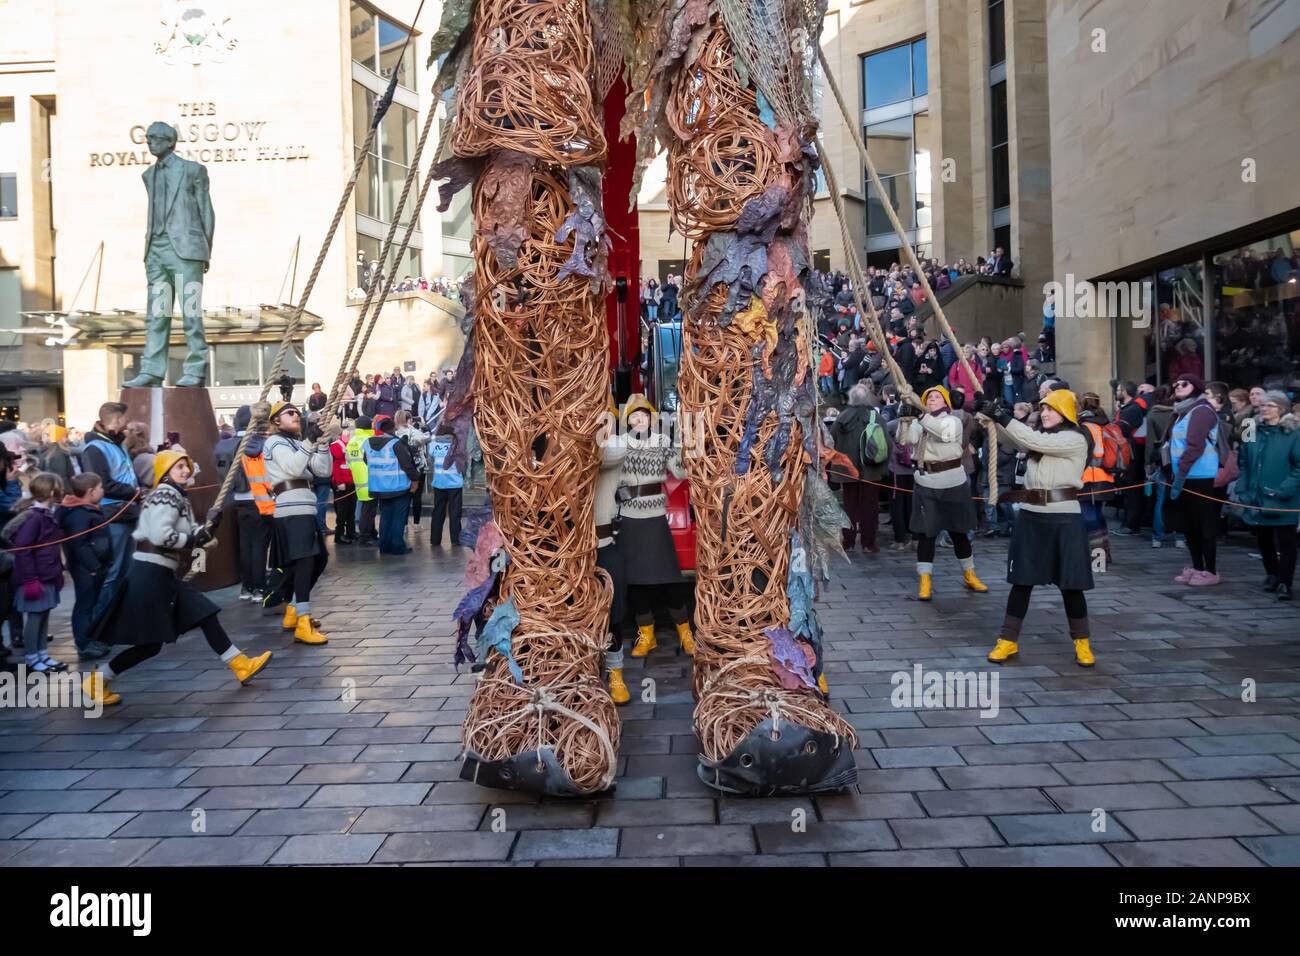 Glasgow, Scotland, UK. 18th January, 2020. A ten metre tall giant puppet called Storm attends Celtic Connections Coastal Day. Puppeteers from Vision Mechanics operate the mythical sea goddess which was two years in the making. The puppet is made from entirely recycled and natural resources. Marking the start of Scotland’s Year of Coasts & Waters, Storm will strive to remind us of our duty to care for our coastlines. Credit: Skully/Alamy Live News Stock Photo